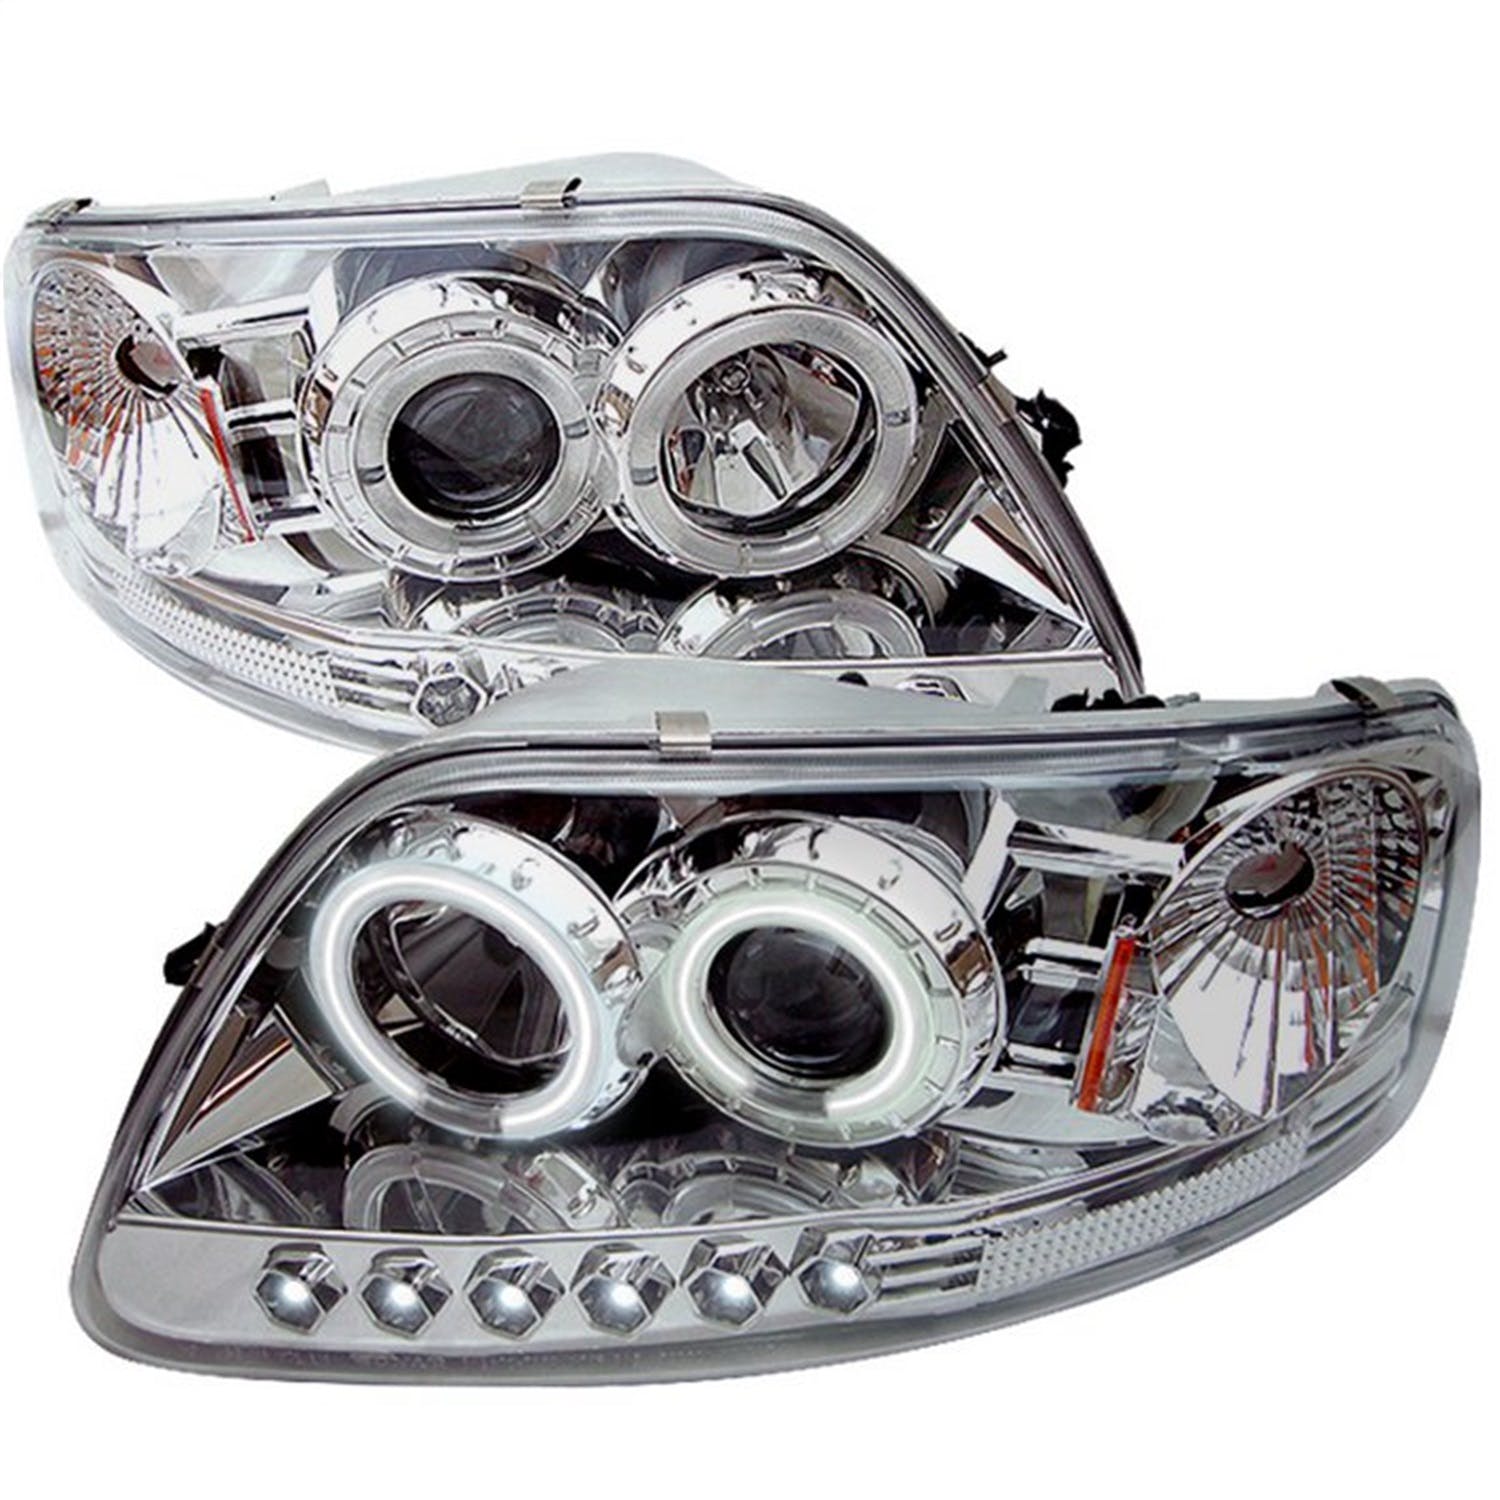 Spyder Auto 5010308 (Spyder) Ford F150 97-03/Expedition 97-02 1PC Projector Headlights-( Will Not Fi